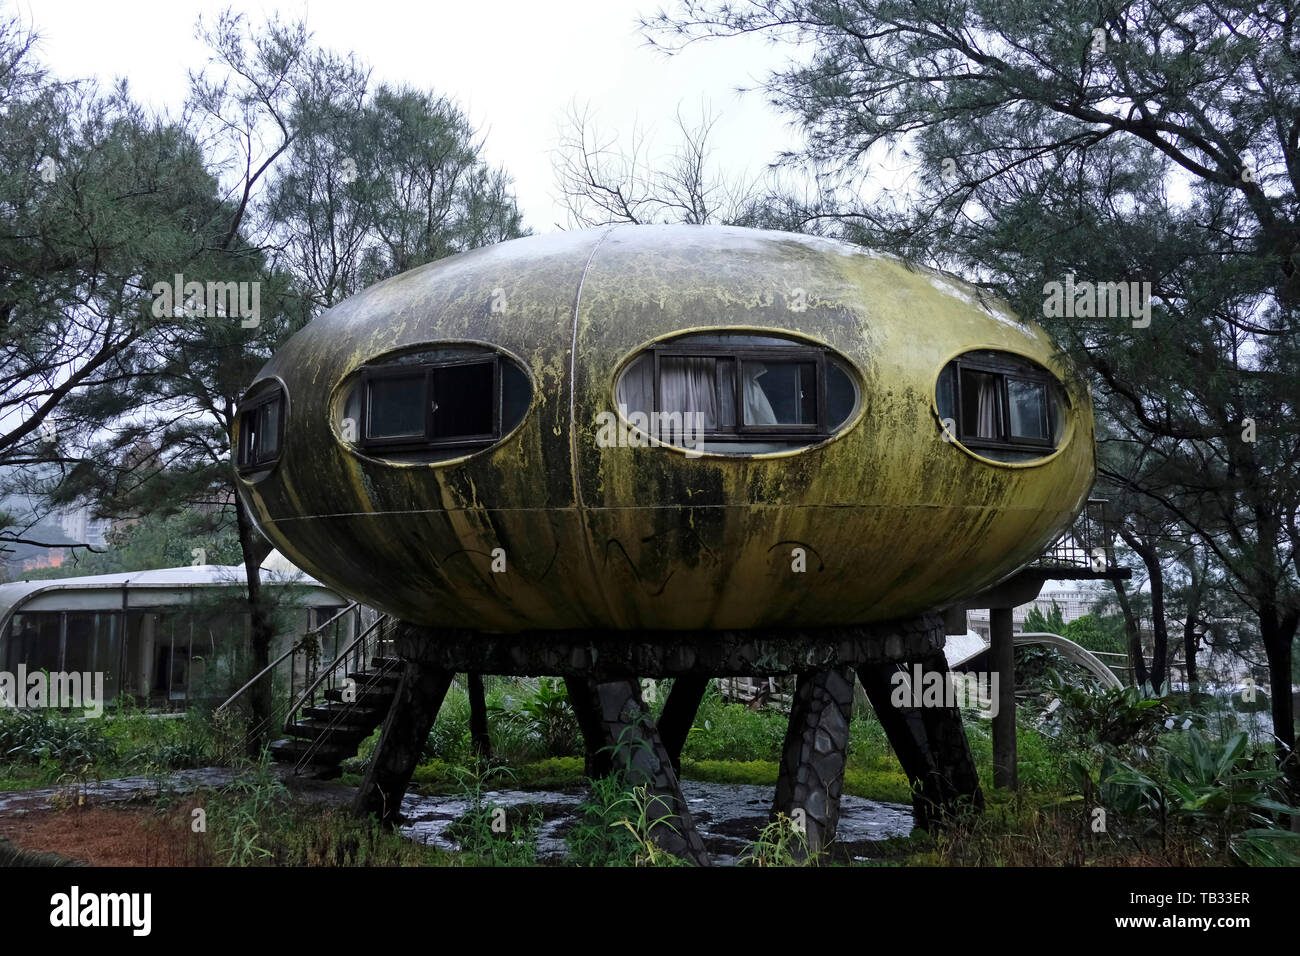 Abandoned Sanzhi UFO house in the neighborhood of Wanli region home to the last pod of Futuro “UFO” houses in Sanzhi District, New Taipei, Taiwan. The Sanzhi pod houses or Sanzhi Pod City, were a set of abandoned and never completed pod-shaped buildings a concept from the 1960s envisioned by the Finnish architect Matti Suuronen to solve the problem of mass-producing cheap homes. Stock Photo